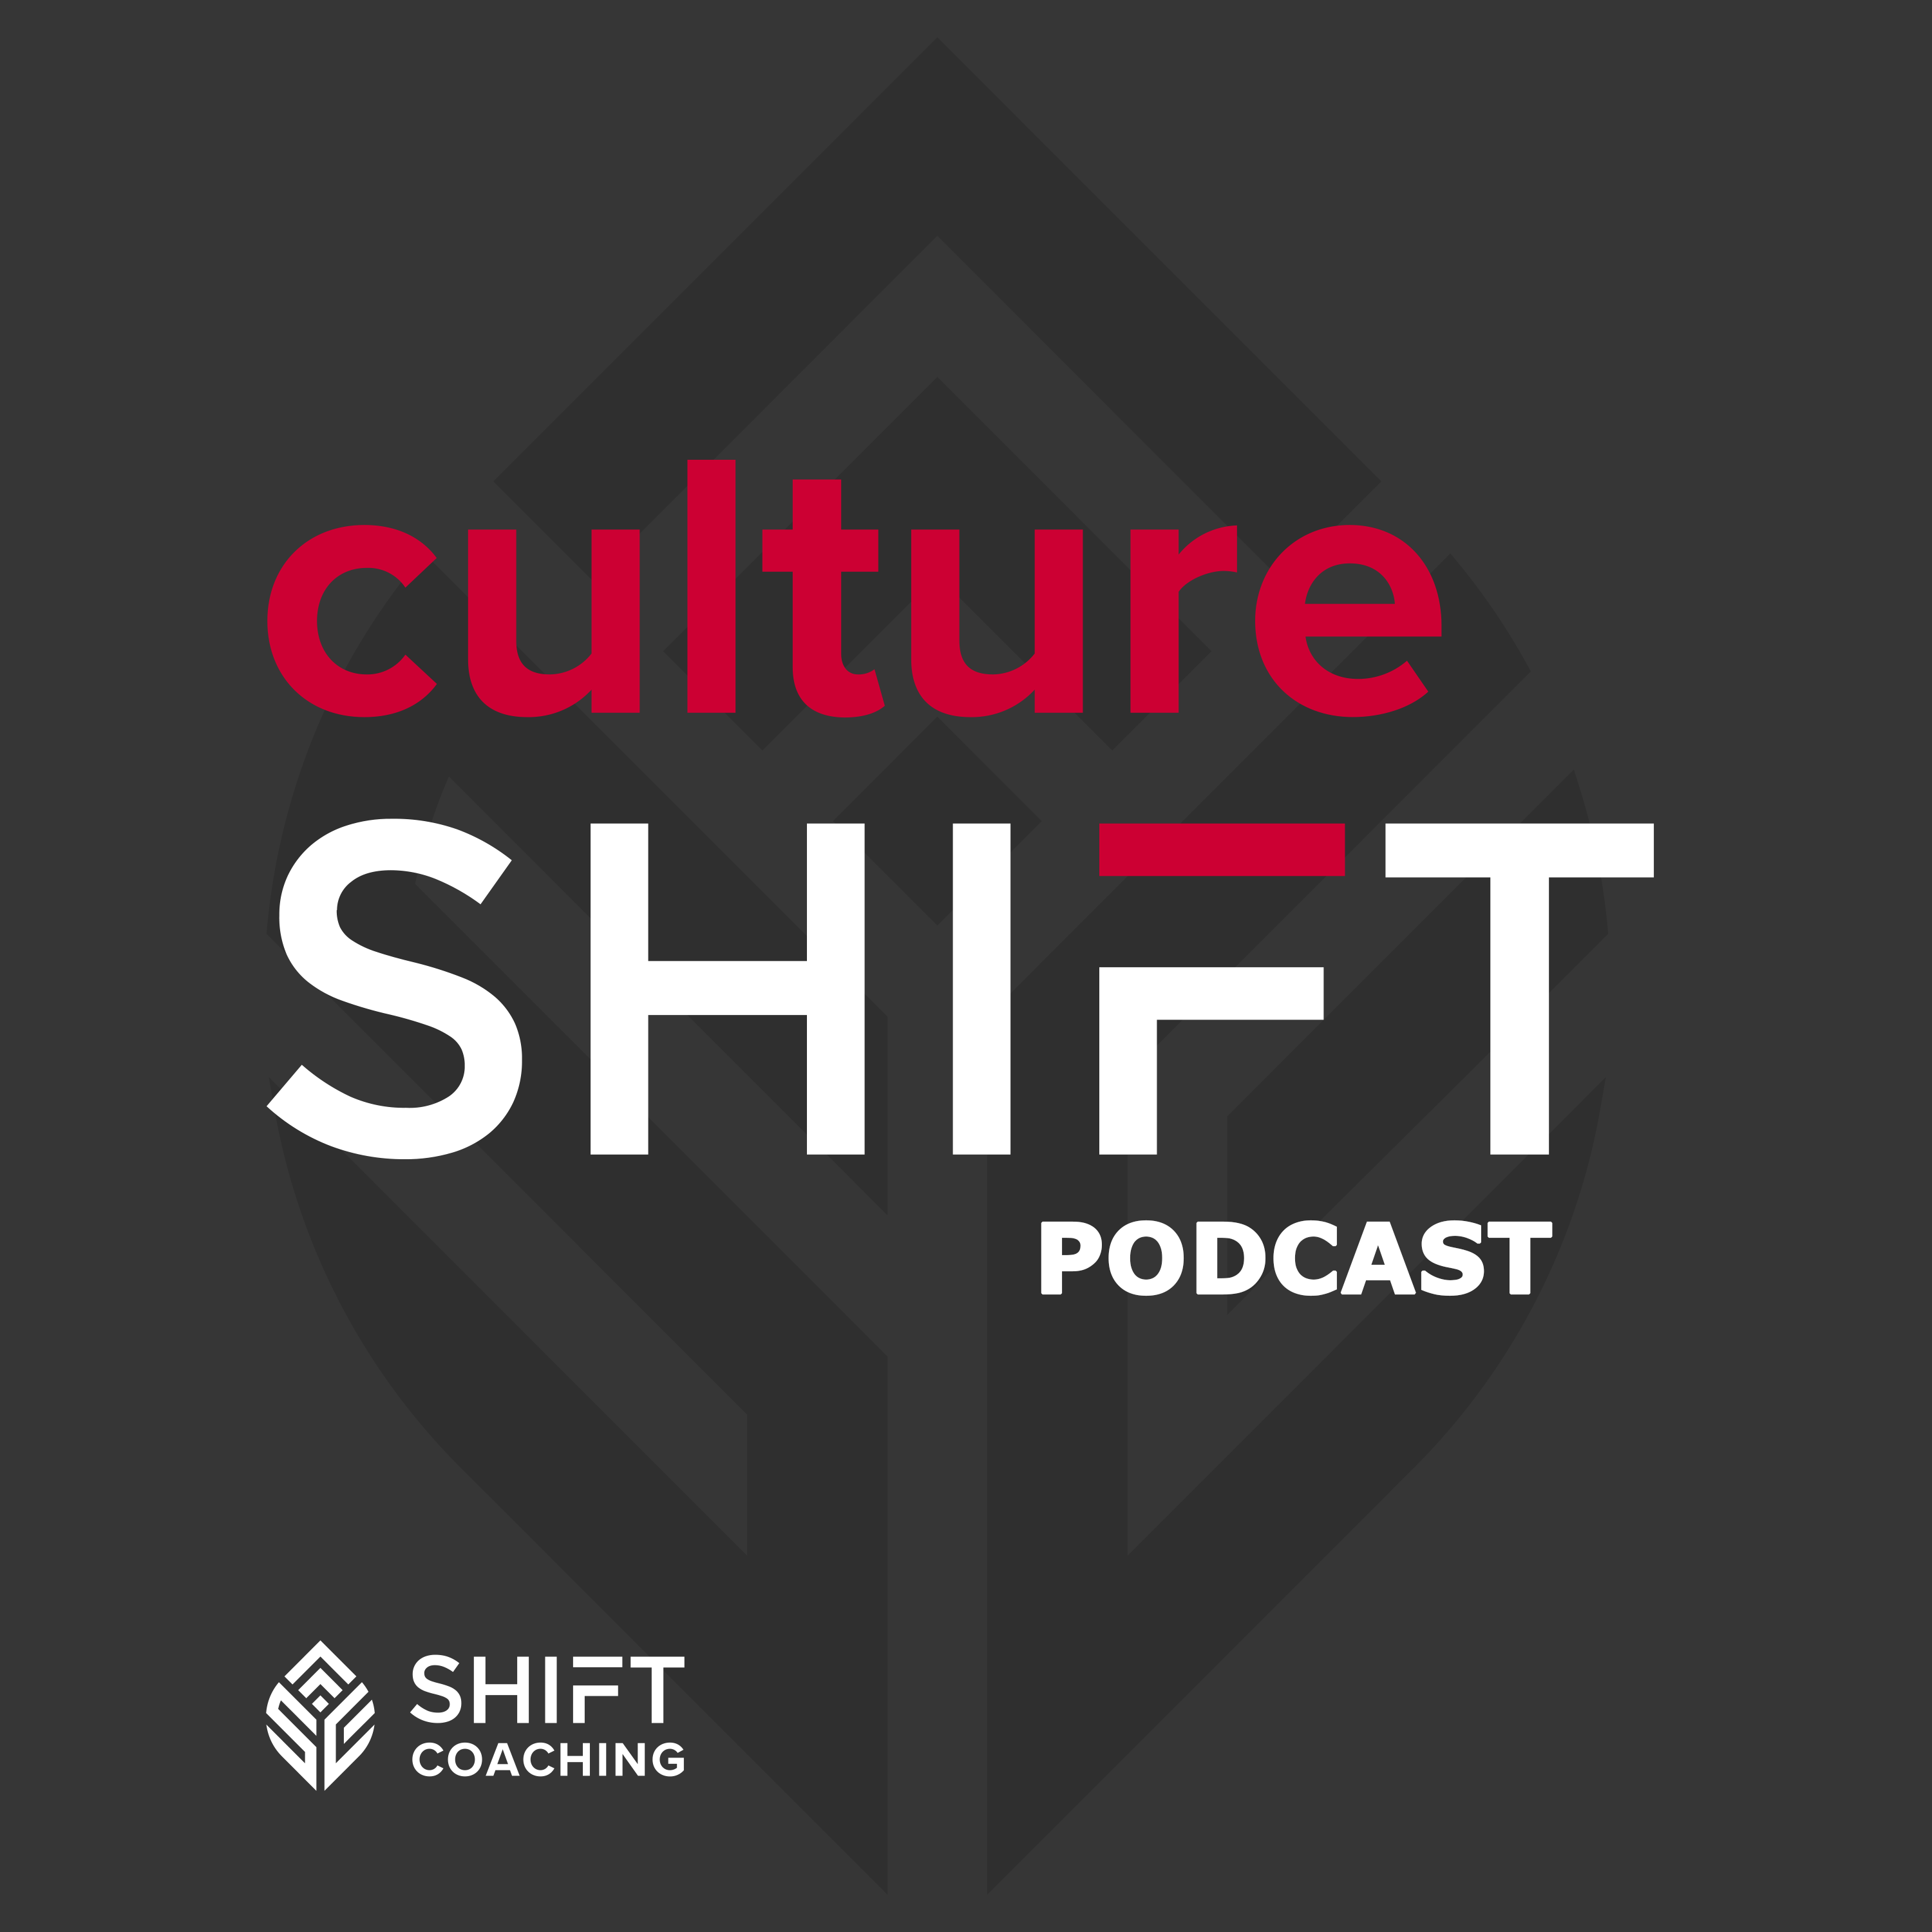 Podcast Launch: Culture Shift